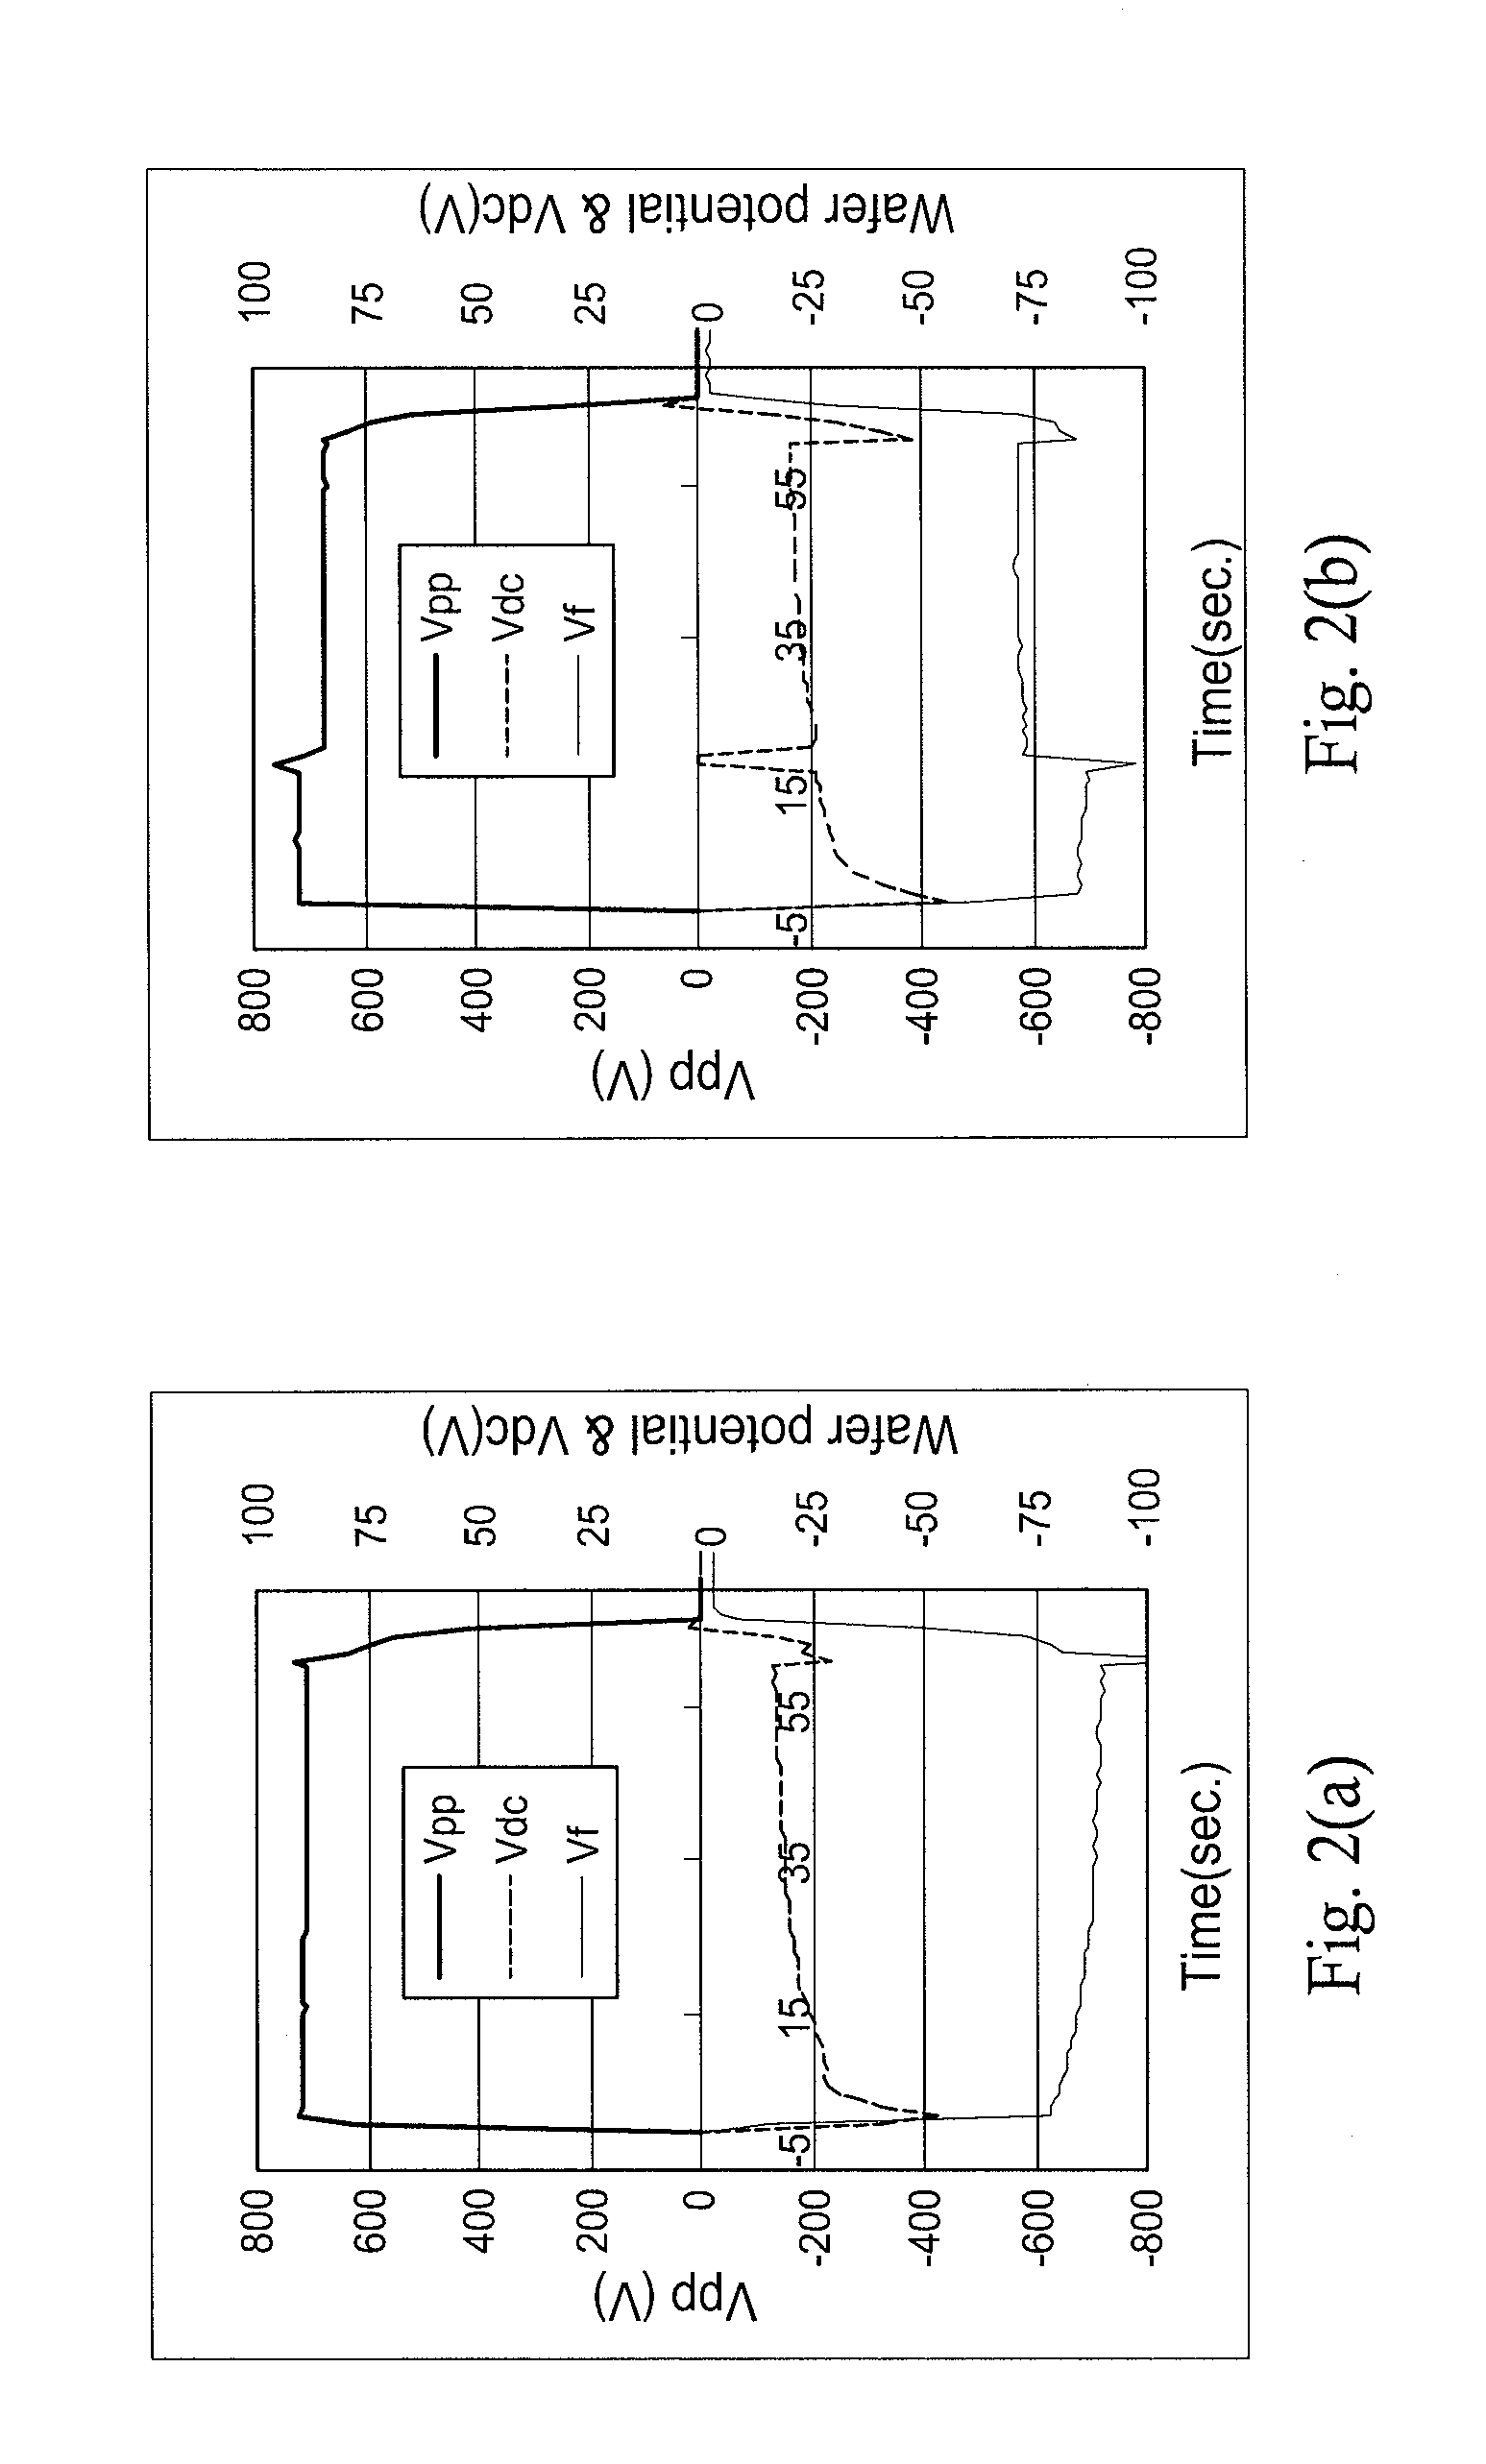 Method and apparatus for monitoring plasma-induced damage using DC floating potential of substrate